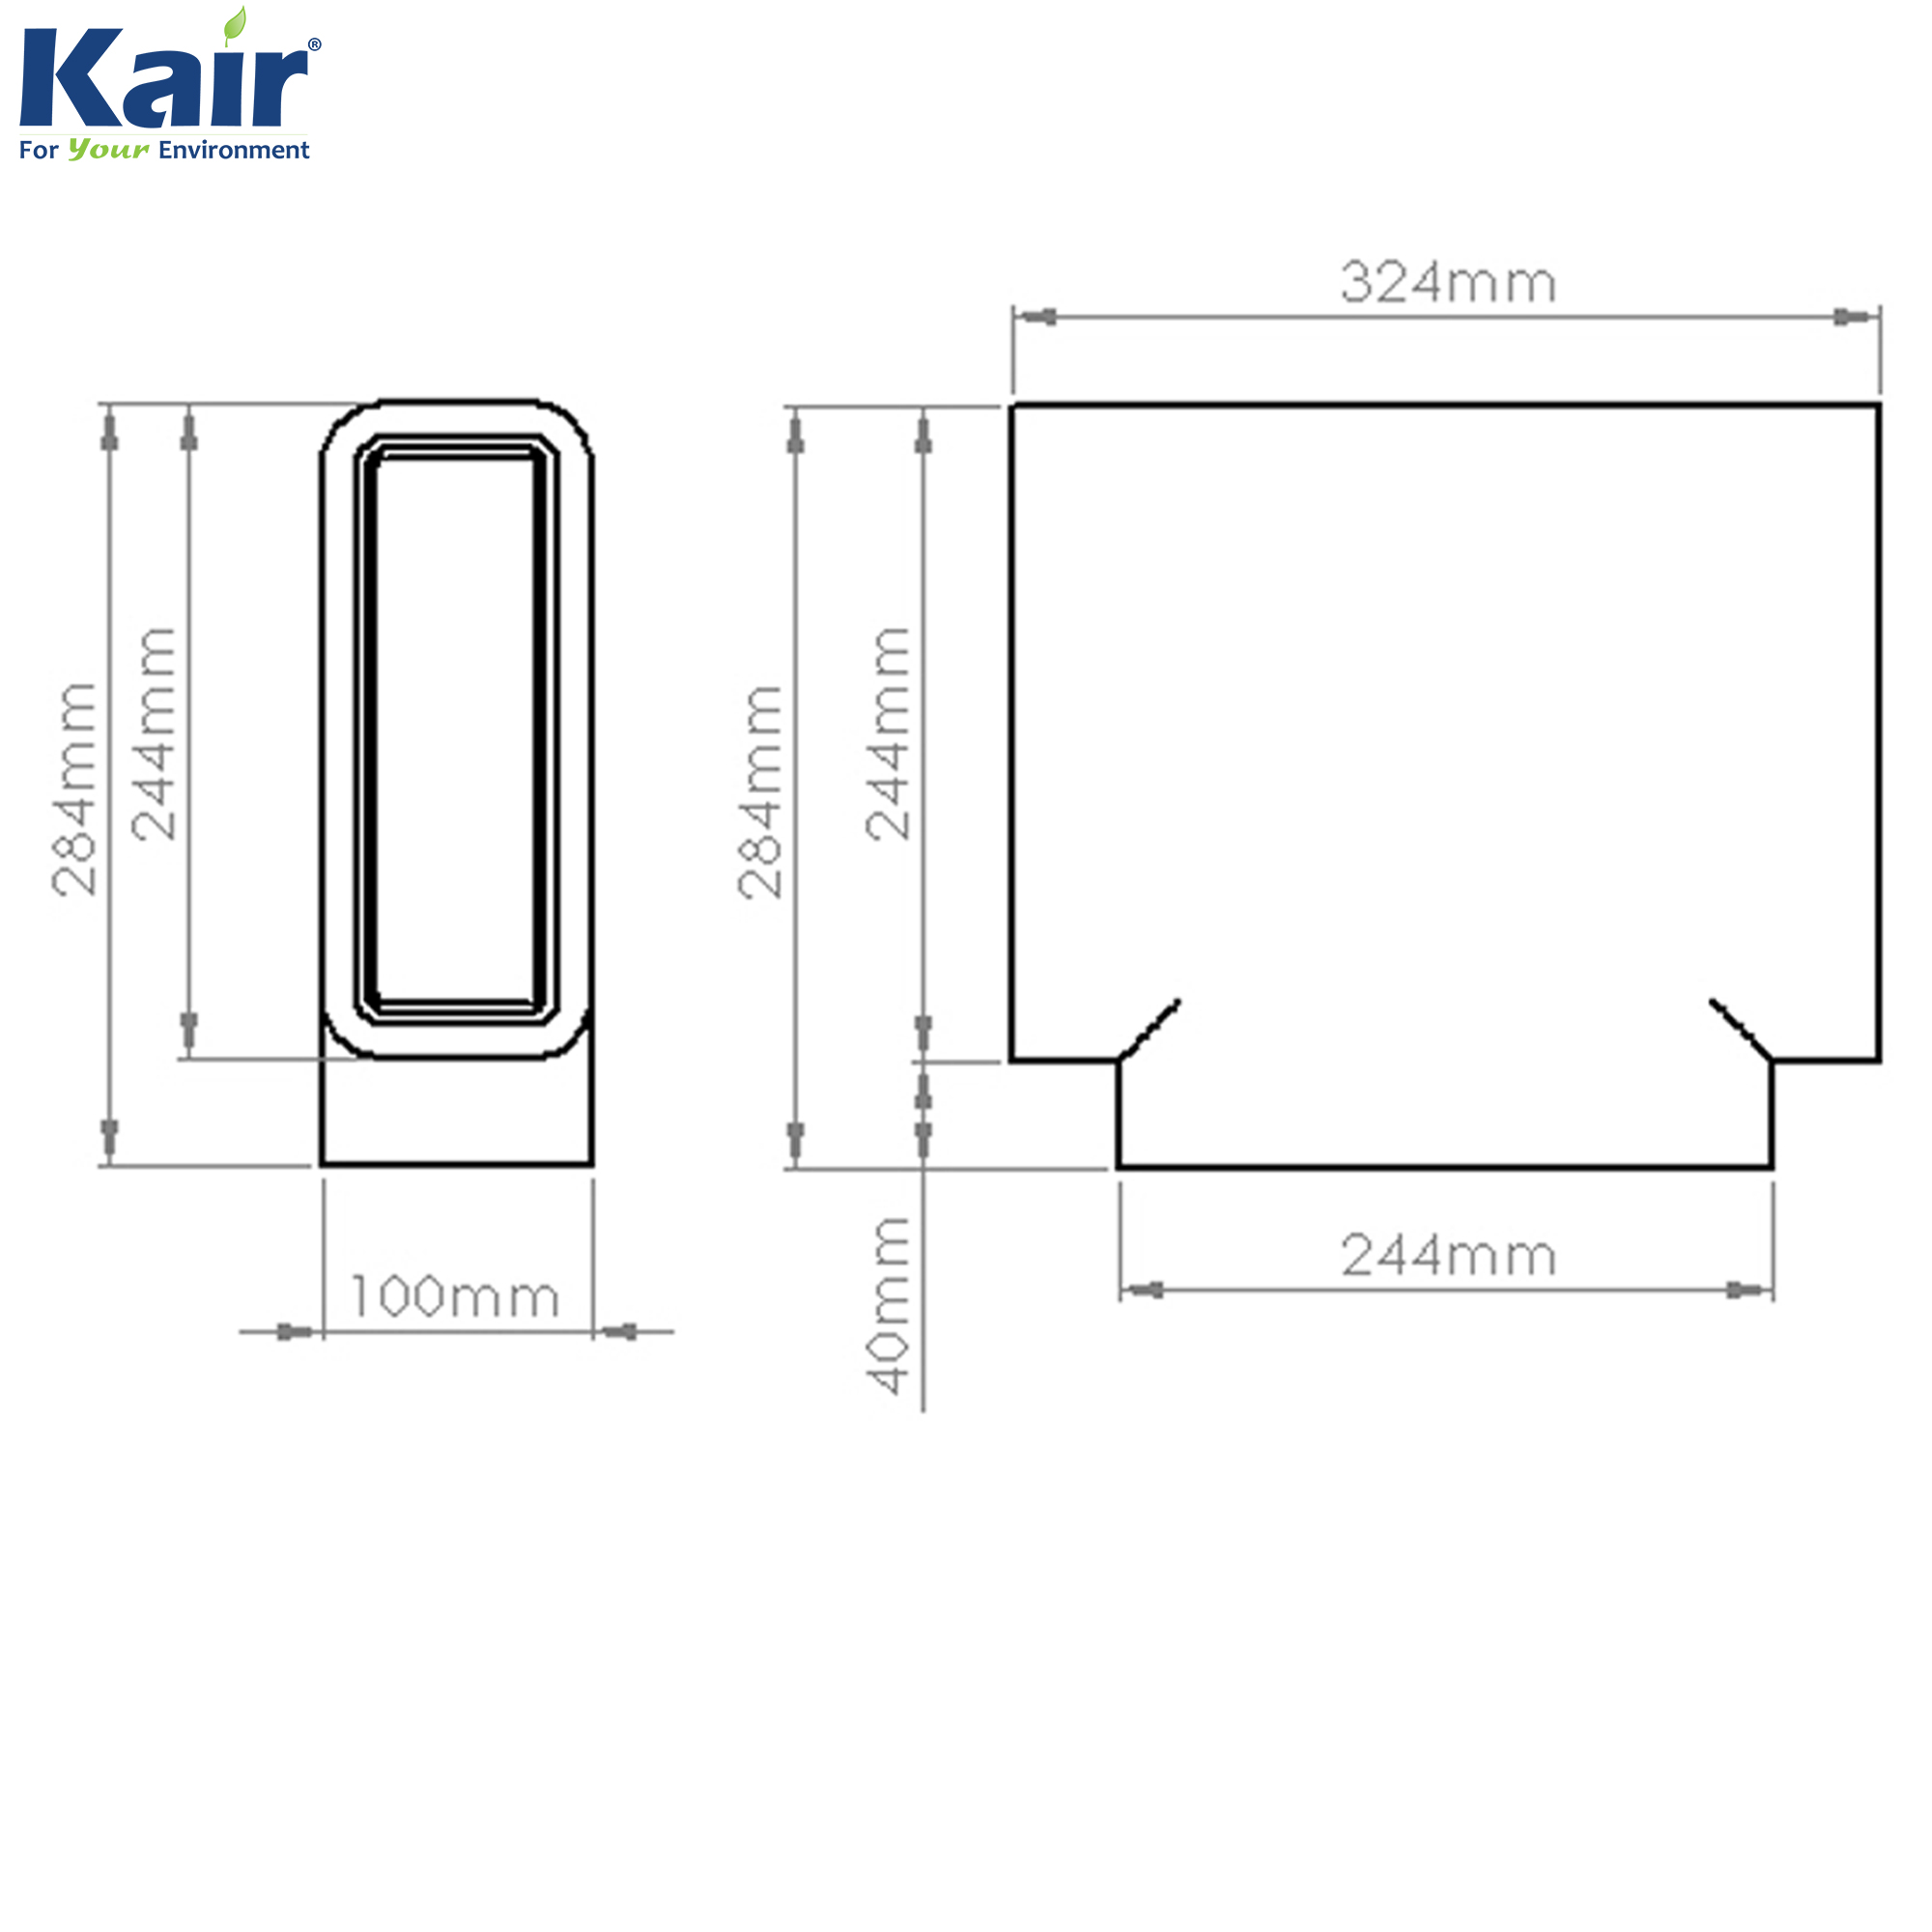 Box of 6 x Kair Self-Seal Thermal Ducting 204X60mm T-Pieces Complete With Female Click And Lock Fittings